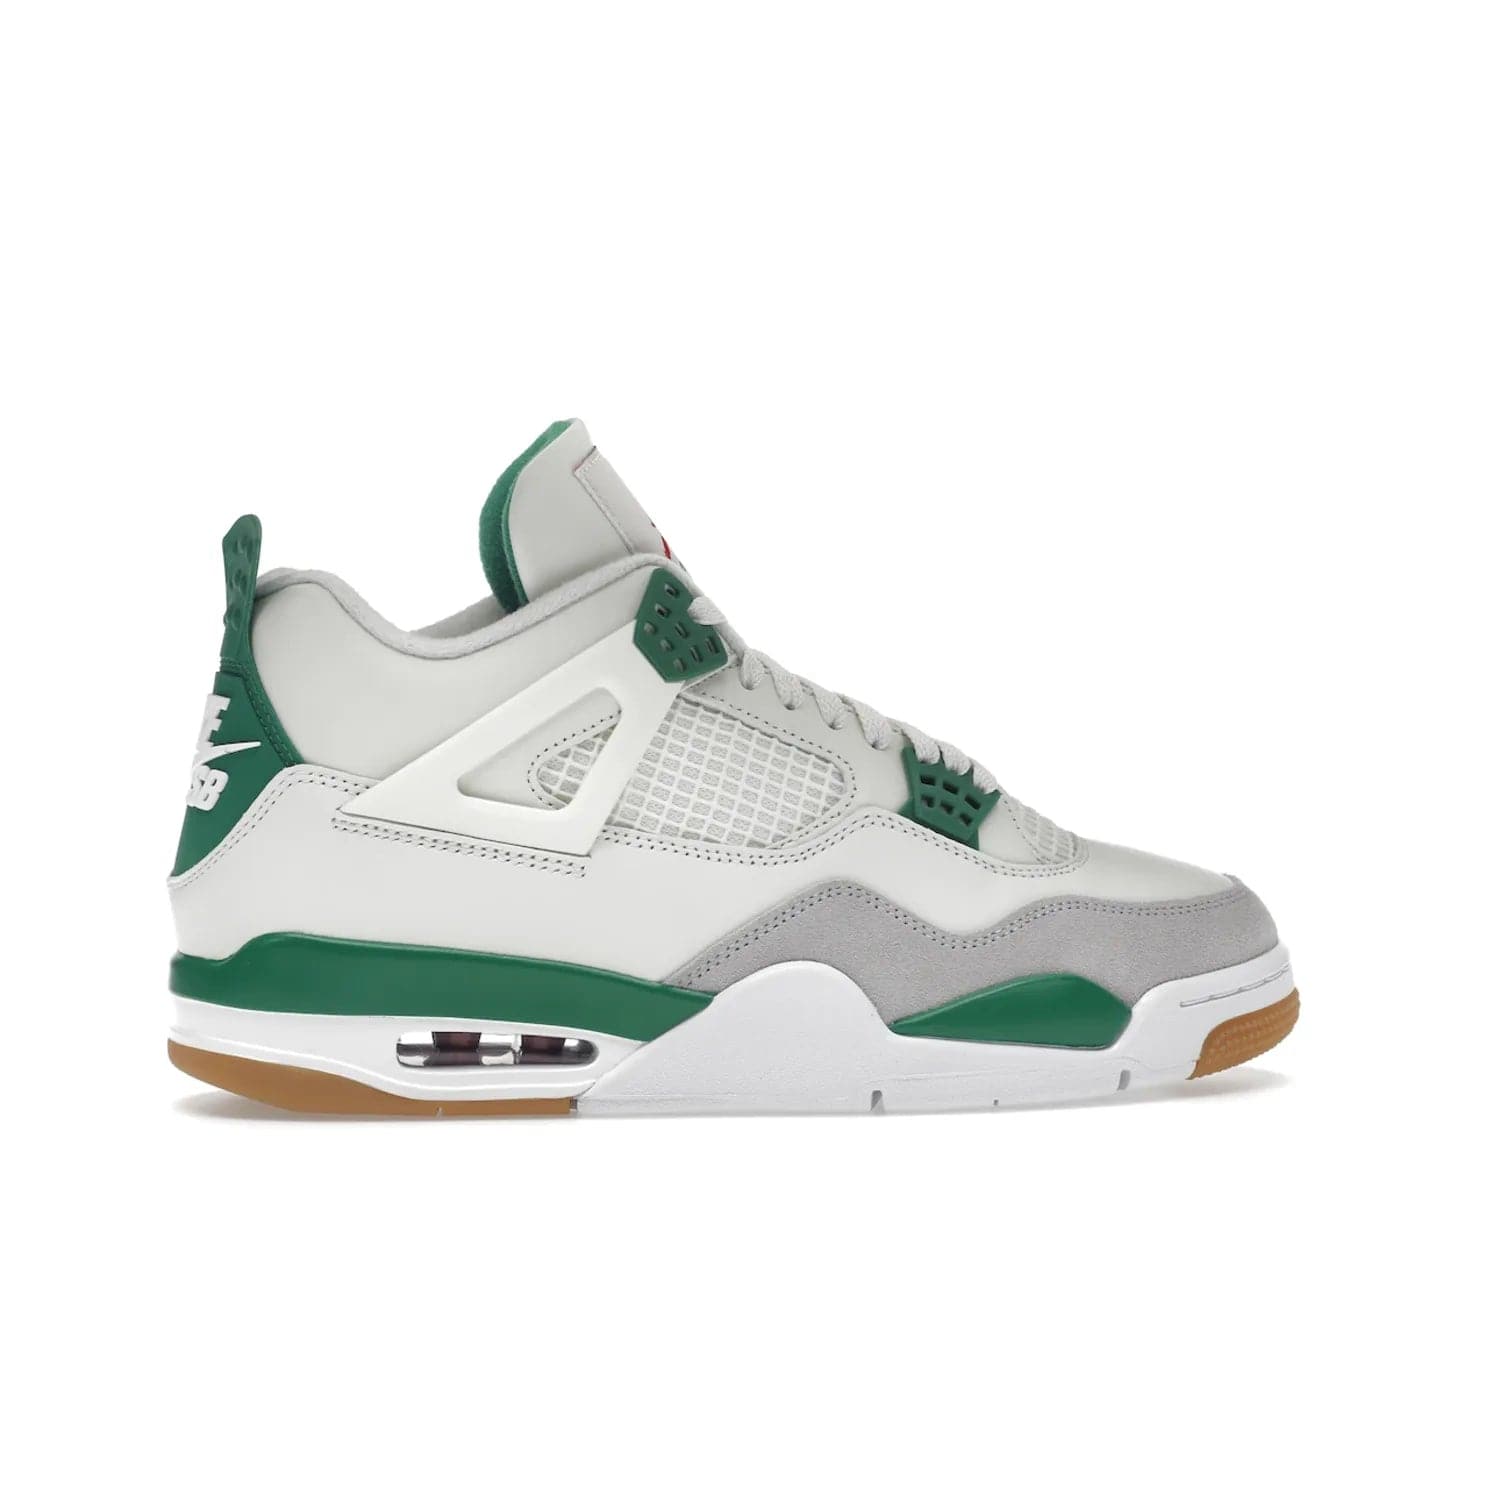 Jordan 4 Retro SB Pine Green - Image 36 - Only at www.BallersClubKickz.com - A white leather upper combined with a Neutral Grey suede mudguard gives this limited Air Jordan 4 Retro SB Pine Green sneaker its unmistakable style. Released March 20, 2023, the Jordan 4 Retro SB features a white and Pine Green midsole plus a red air unit with a gum outsole for grip. The perfect blend of Nike SB skateboarding and Jordan 4 classic design.